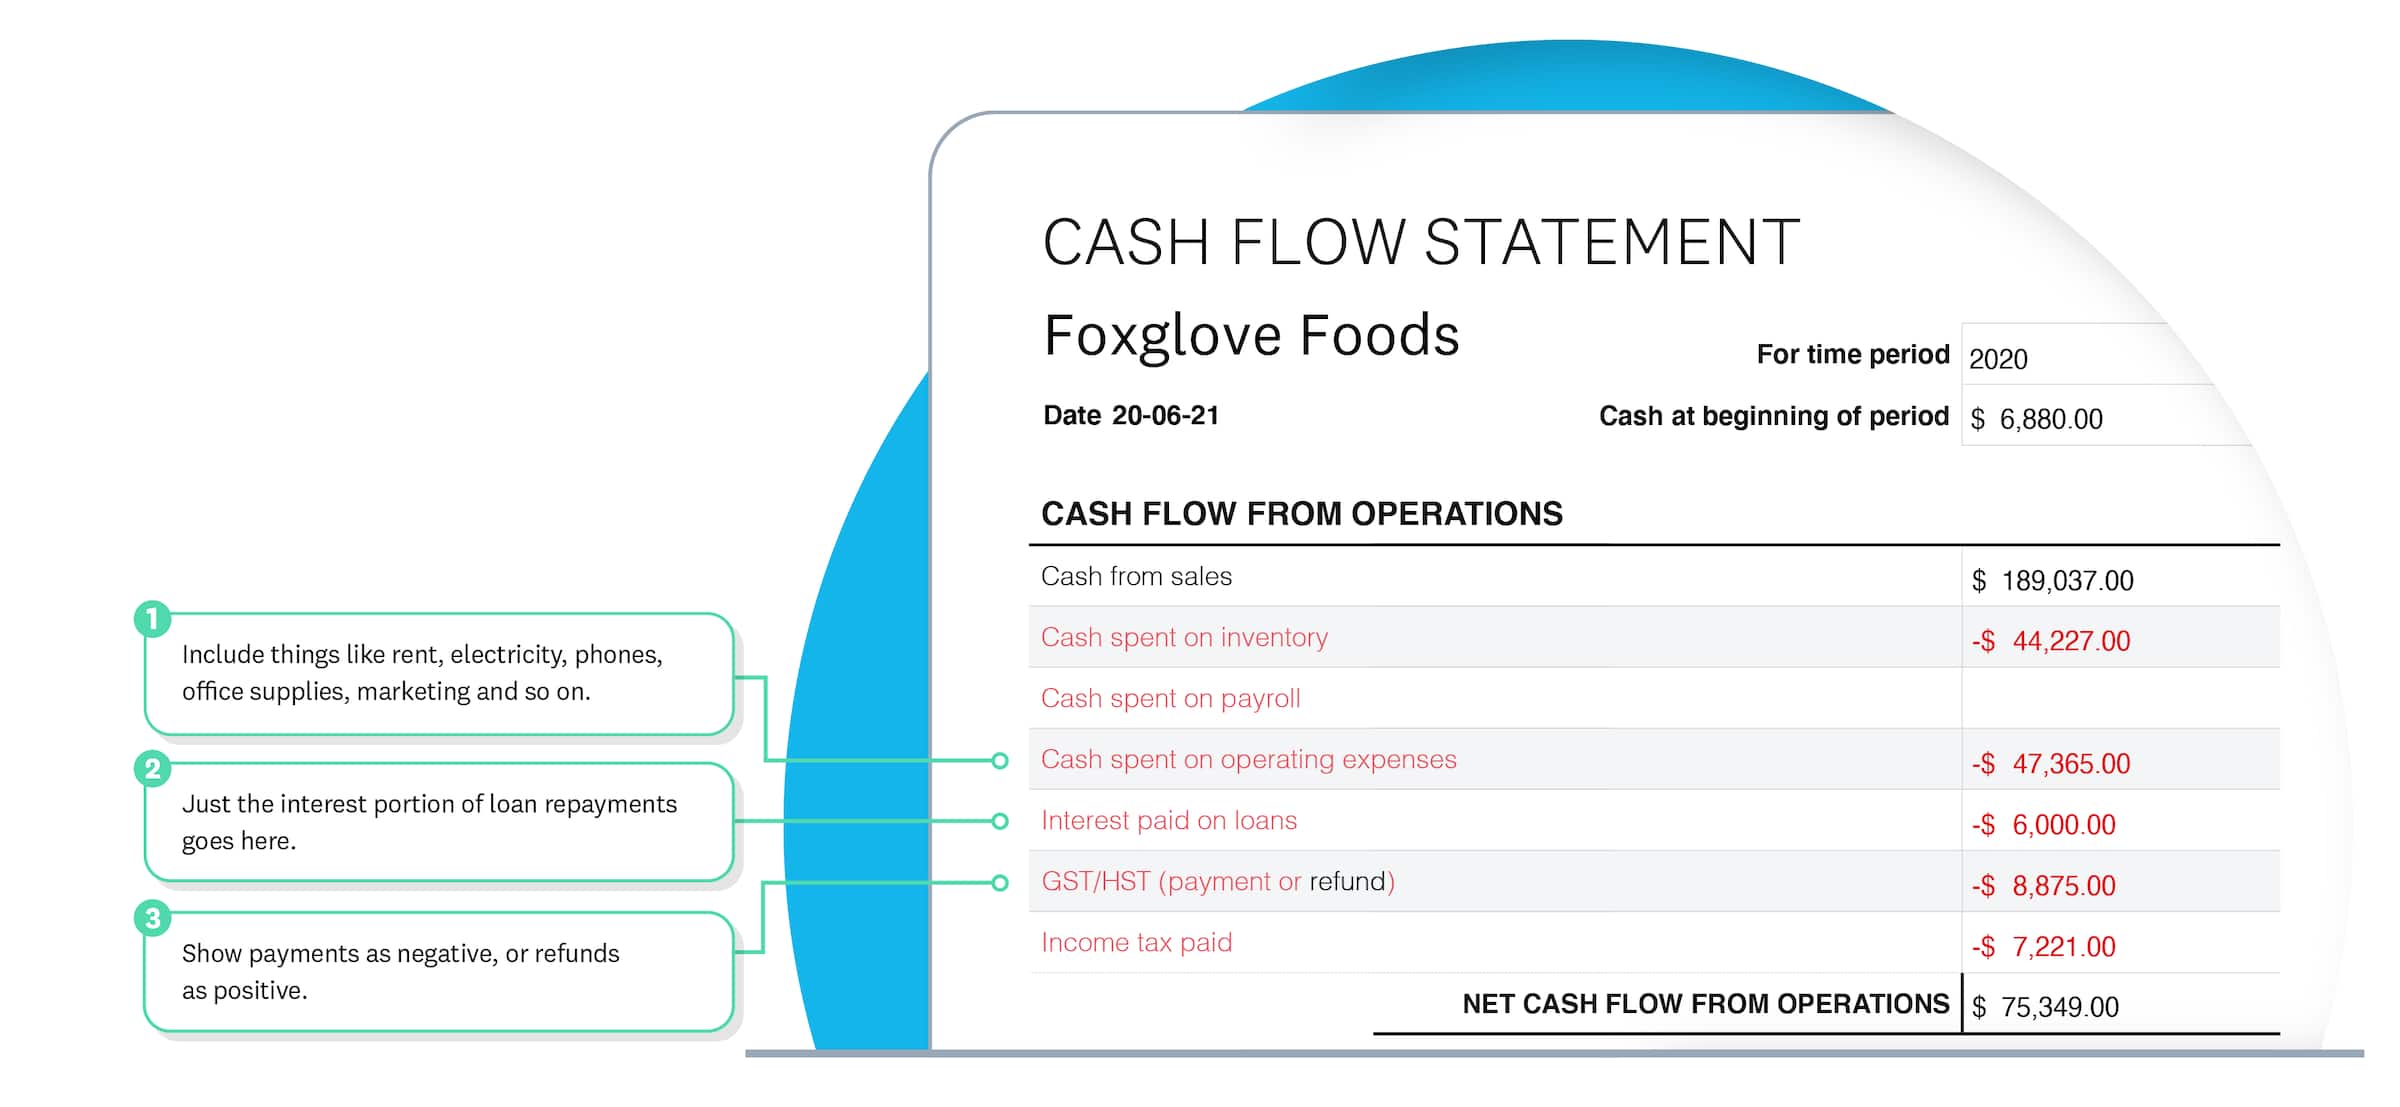 Cash flow from operations shows money in from sales, minus money out on inventory, payroll, operations, loan interest and tax